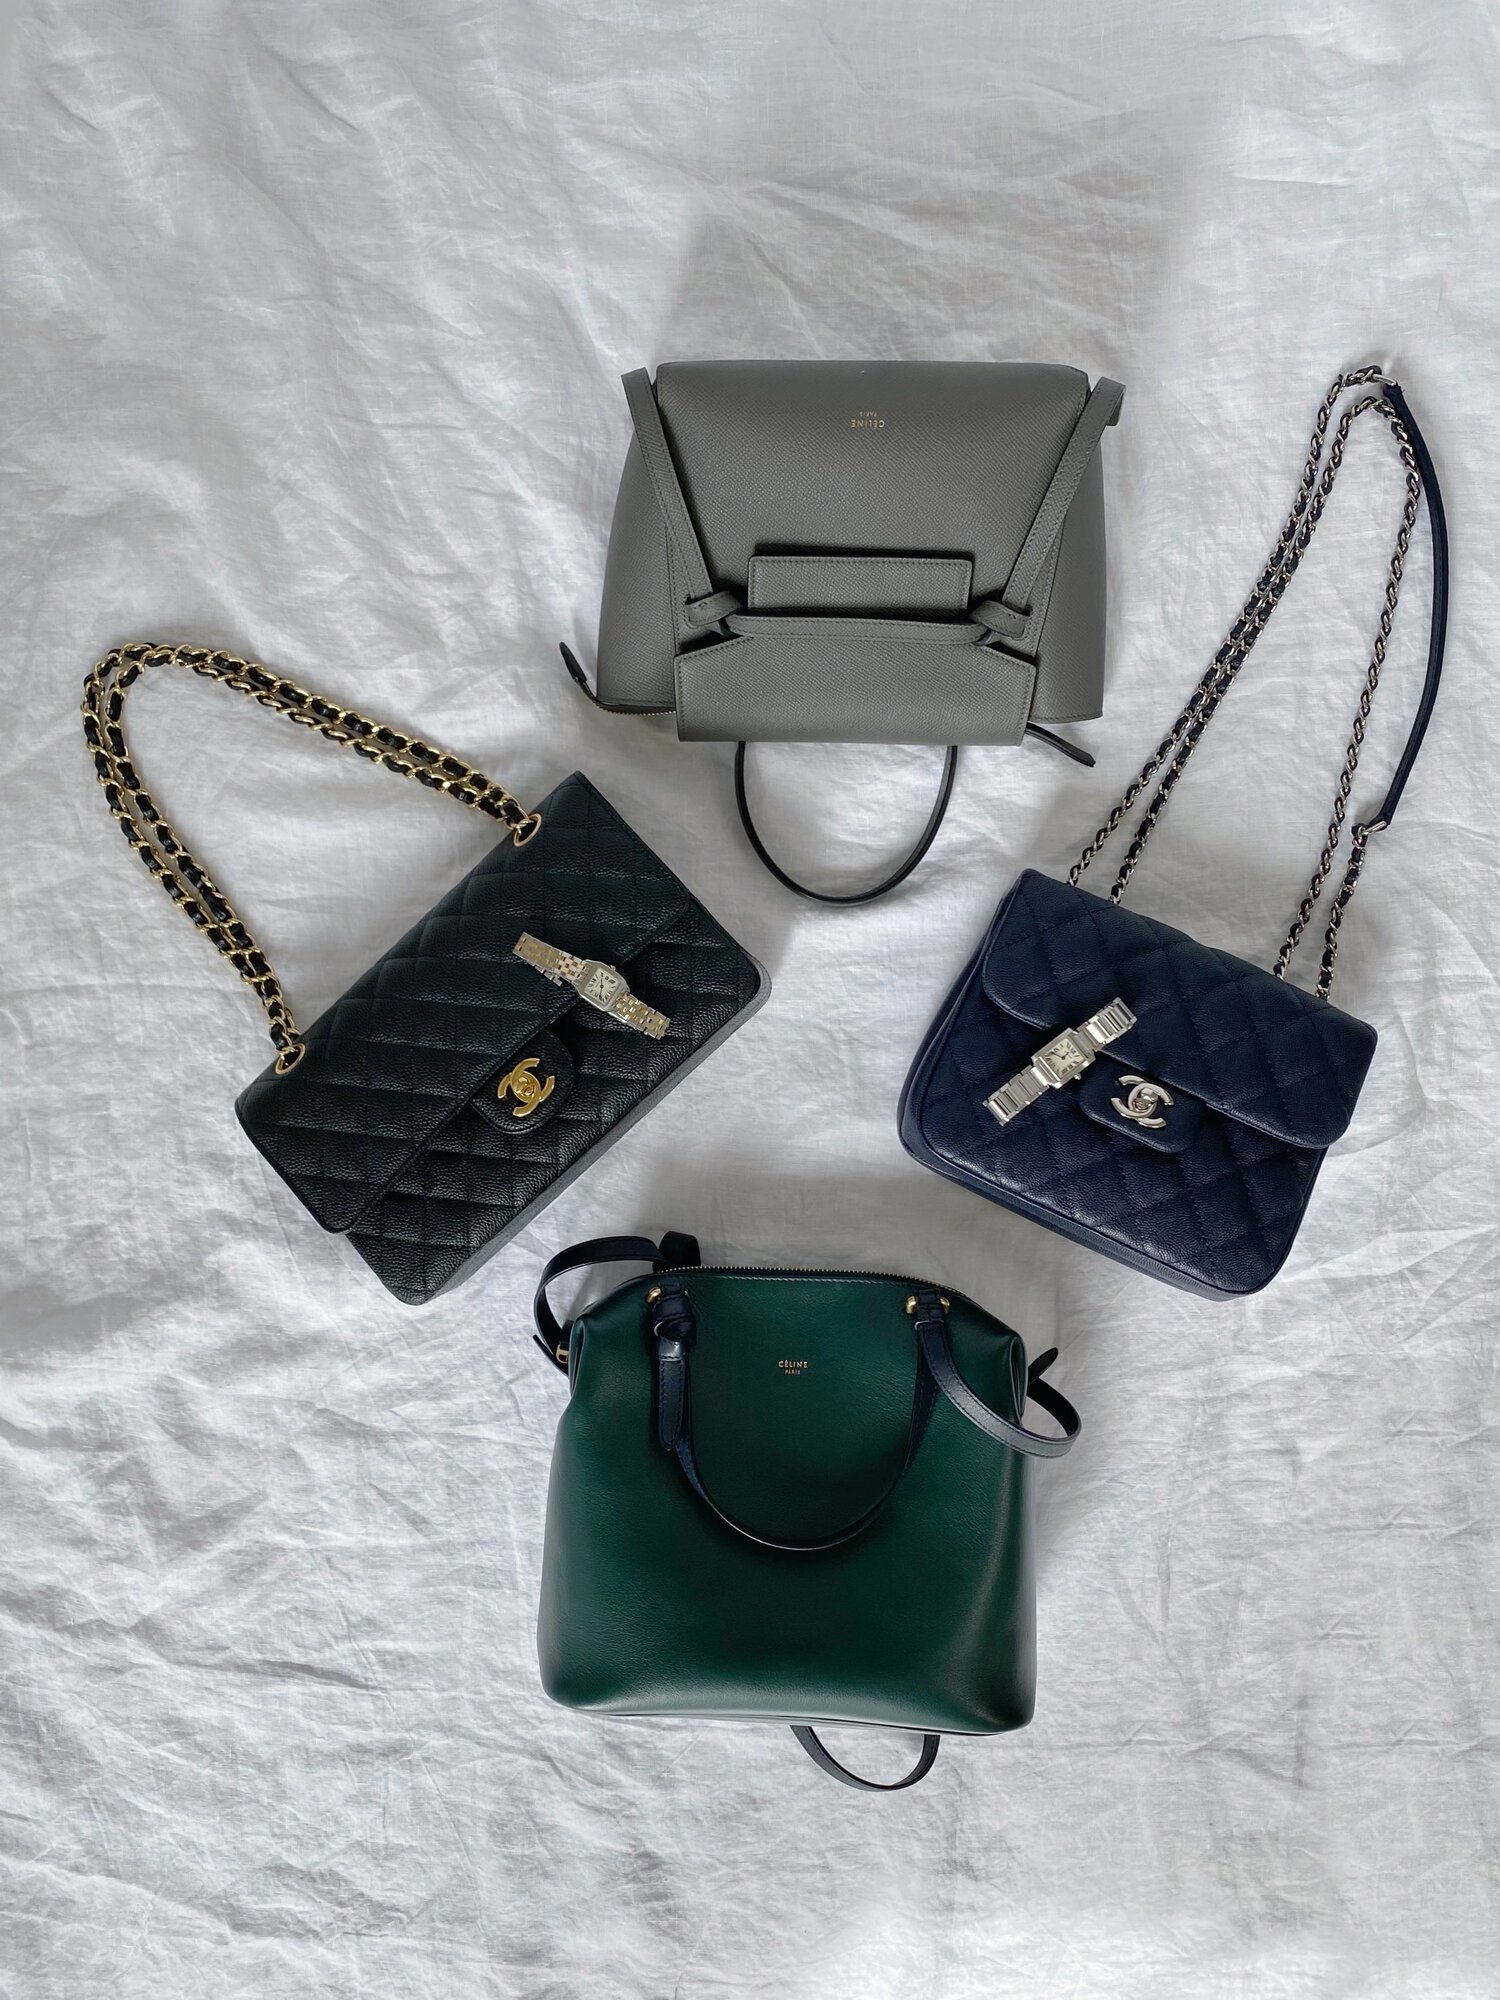 Minimalism, styling, and a purse collection — Fairly Curated